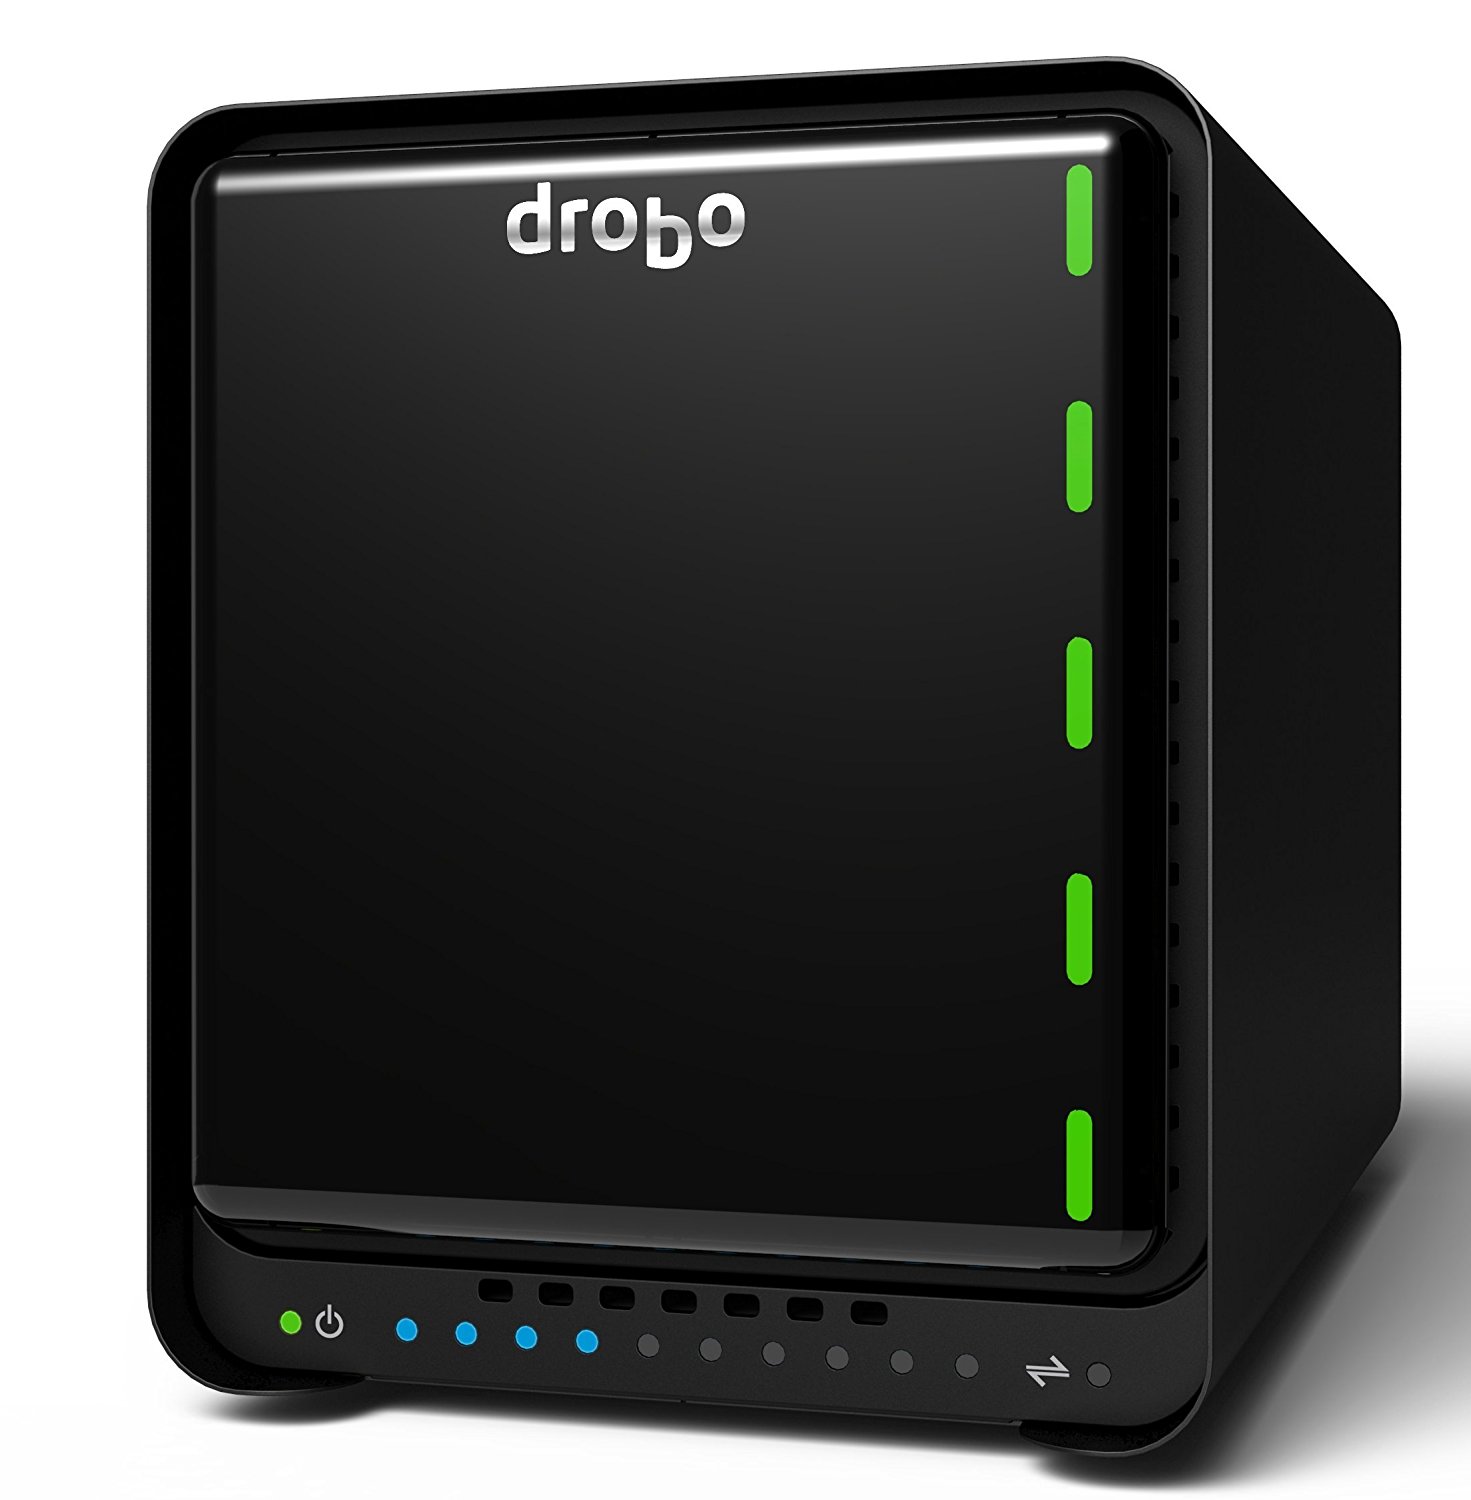 PC- Drobo direct Drobo 5D3 5-Drive Direct Attached Storage (DAS) Array – Dual Thunderbolt 3 and USB 3.0 type C ports (DRDR6A21)